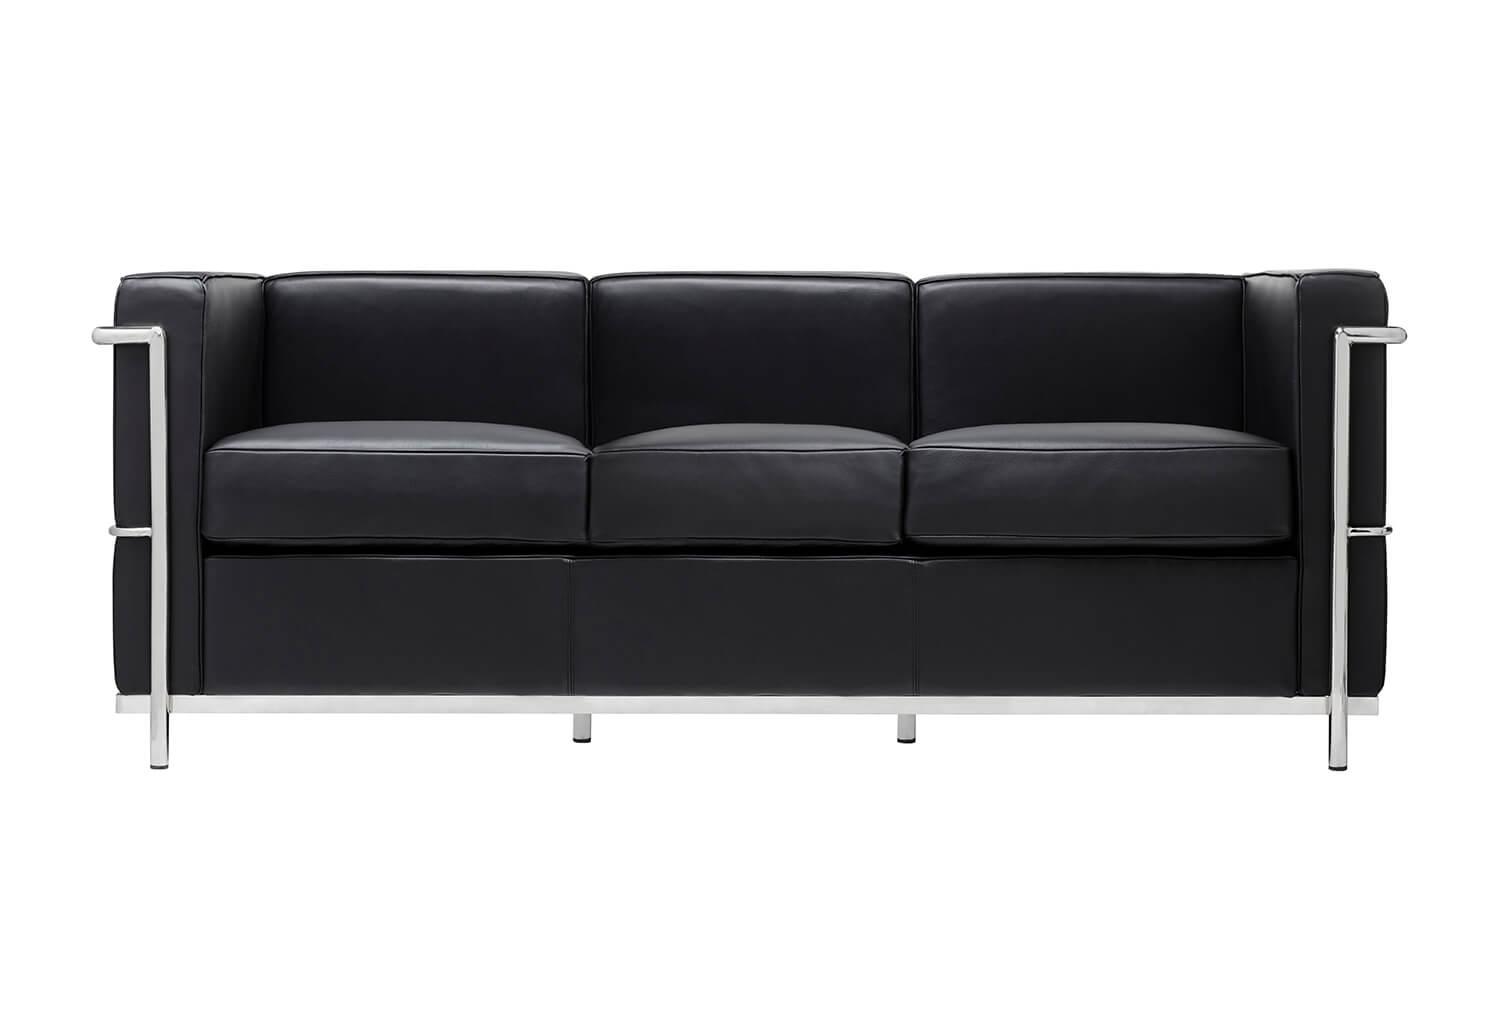 SOFT LC2 three-seater sofa to officeSOFT LC2 three-seater sofa - Product features   SOFT LC2 three-seater sofa, is an exceptional piece of furniture made of high quality materials. Italian natural leather, which is used to cover the sofa, ensures durability and an excellent appearance for years. The pleasant to the touch material, combined with the polished steel looks perfect. The sofa is wide for a three-seater model - it is up to 180 cm wide, allowing three people to sit comfortably. The furniture has been designed with our comfort in mind - the seat is 42 cm high, making it easy to sit down and stand up.